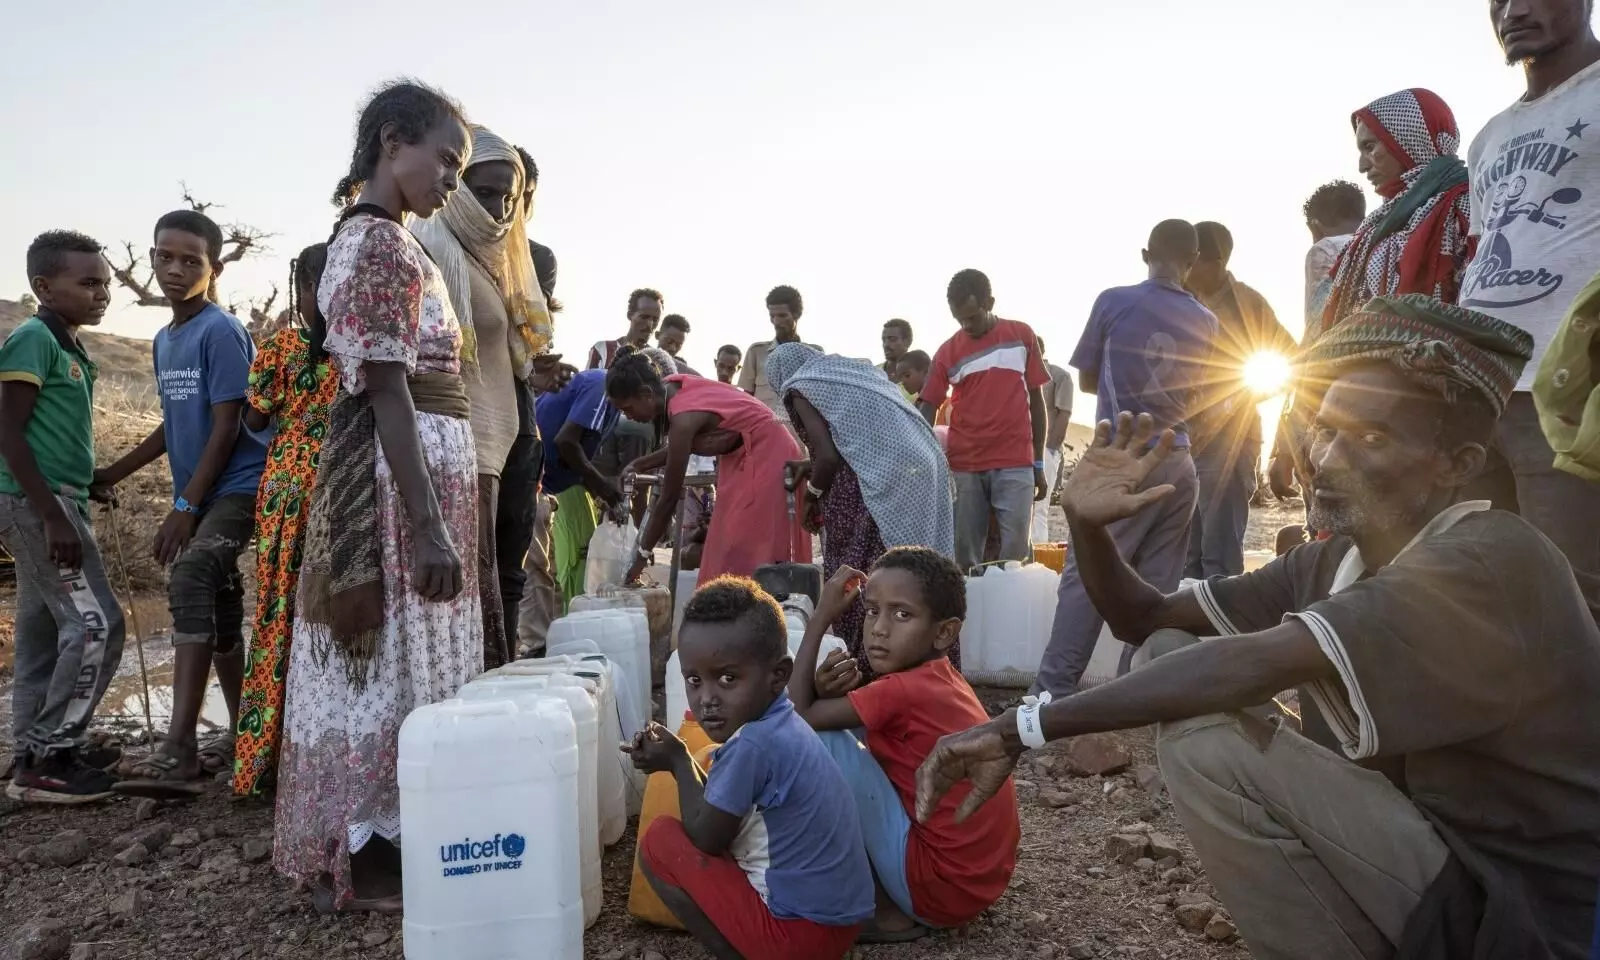 UN: Displacements in Ethiopia increase the need for relief